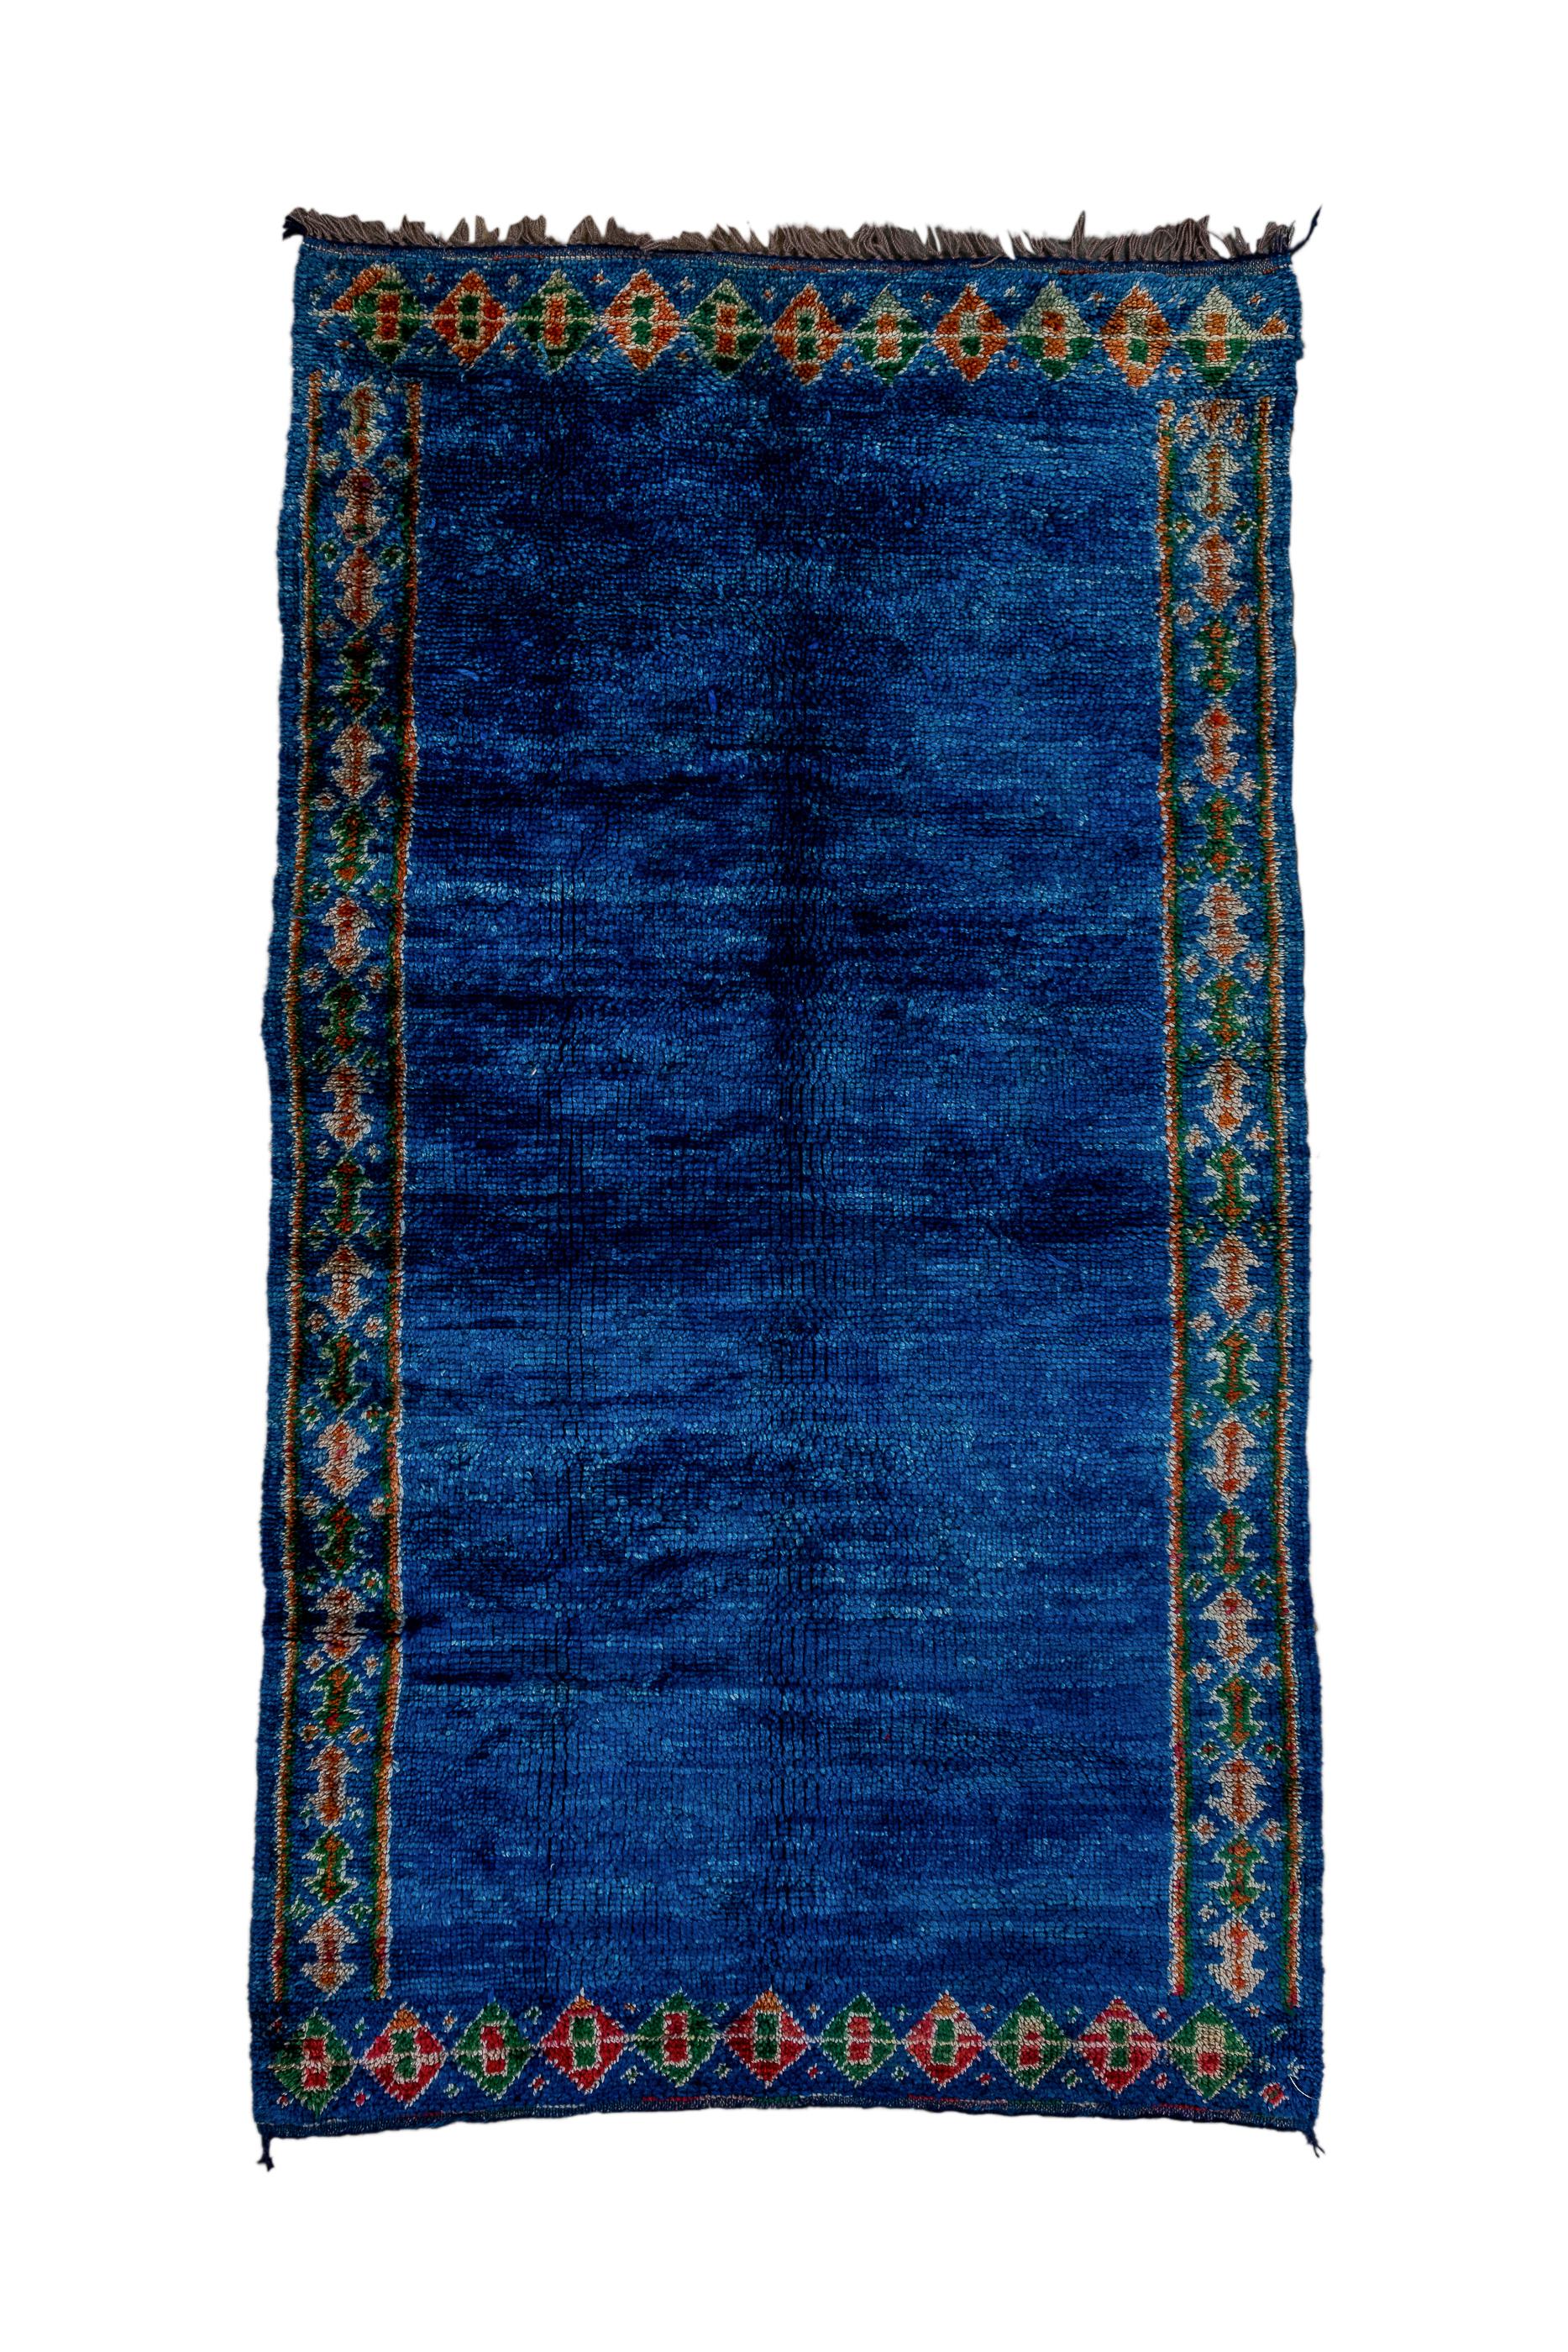 The open, royal blue abrashed and radiant field is neatly framed by the equally blue border of doubled arrowheads in the Turkish manner. From the Moroccan lowlands. Coarse weave. All wool and long pile. Good condition.
  